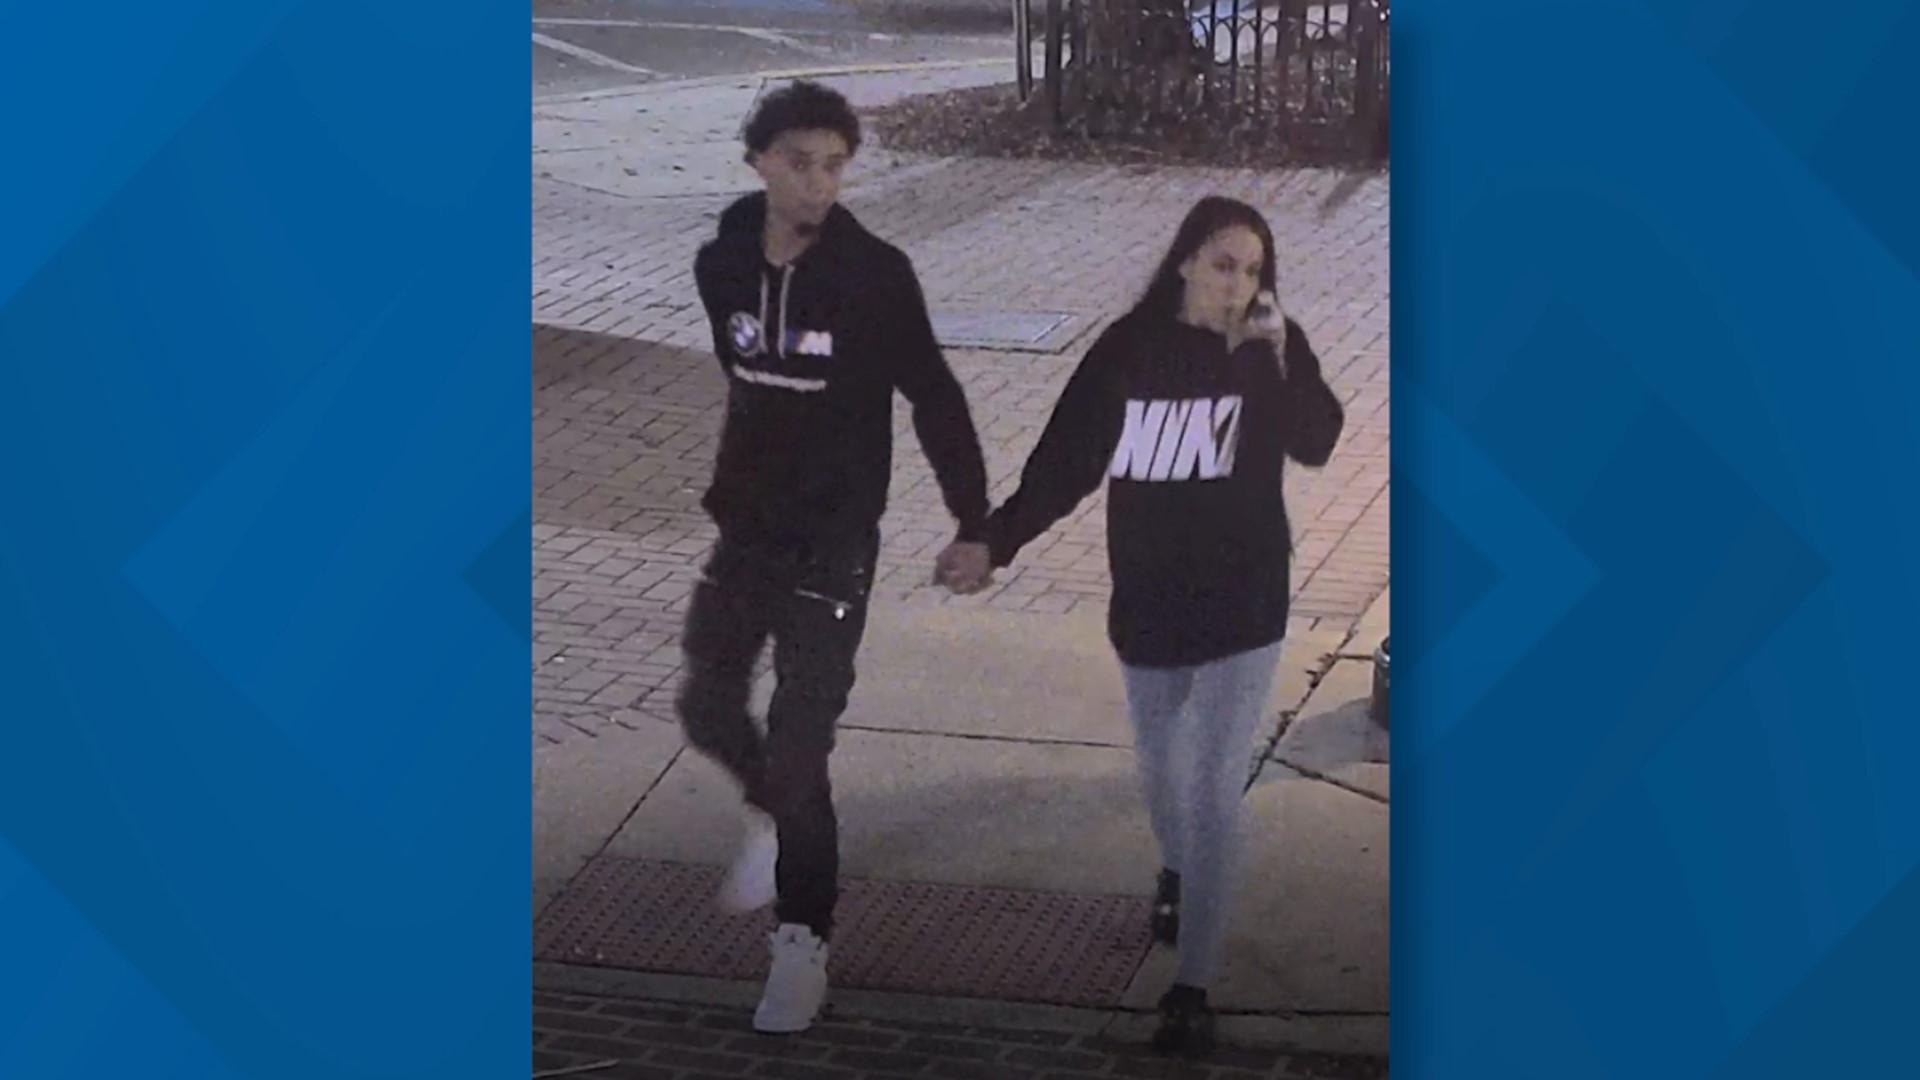 Two people are now considered persons of interest in last month's shooting in Stroudsburg.